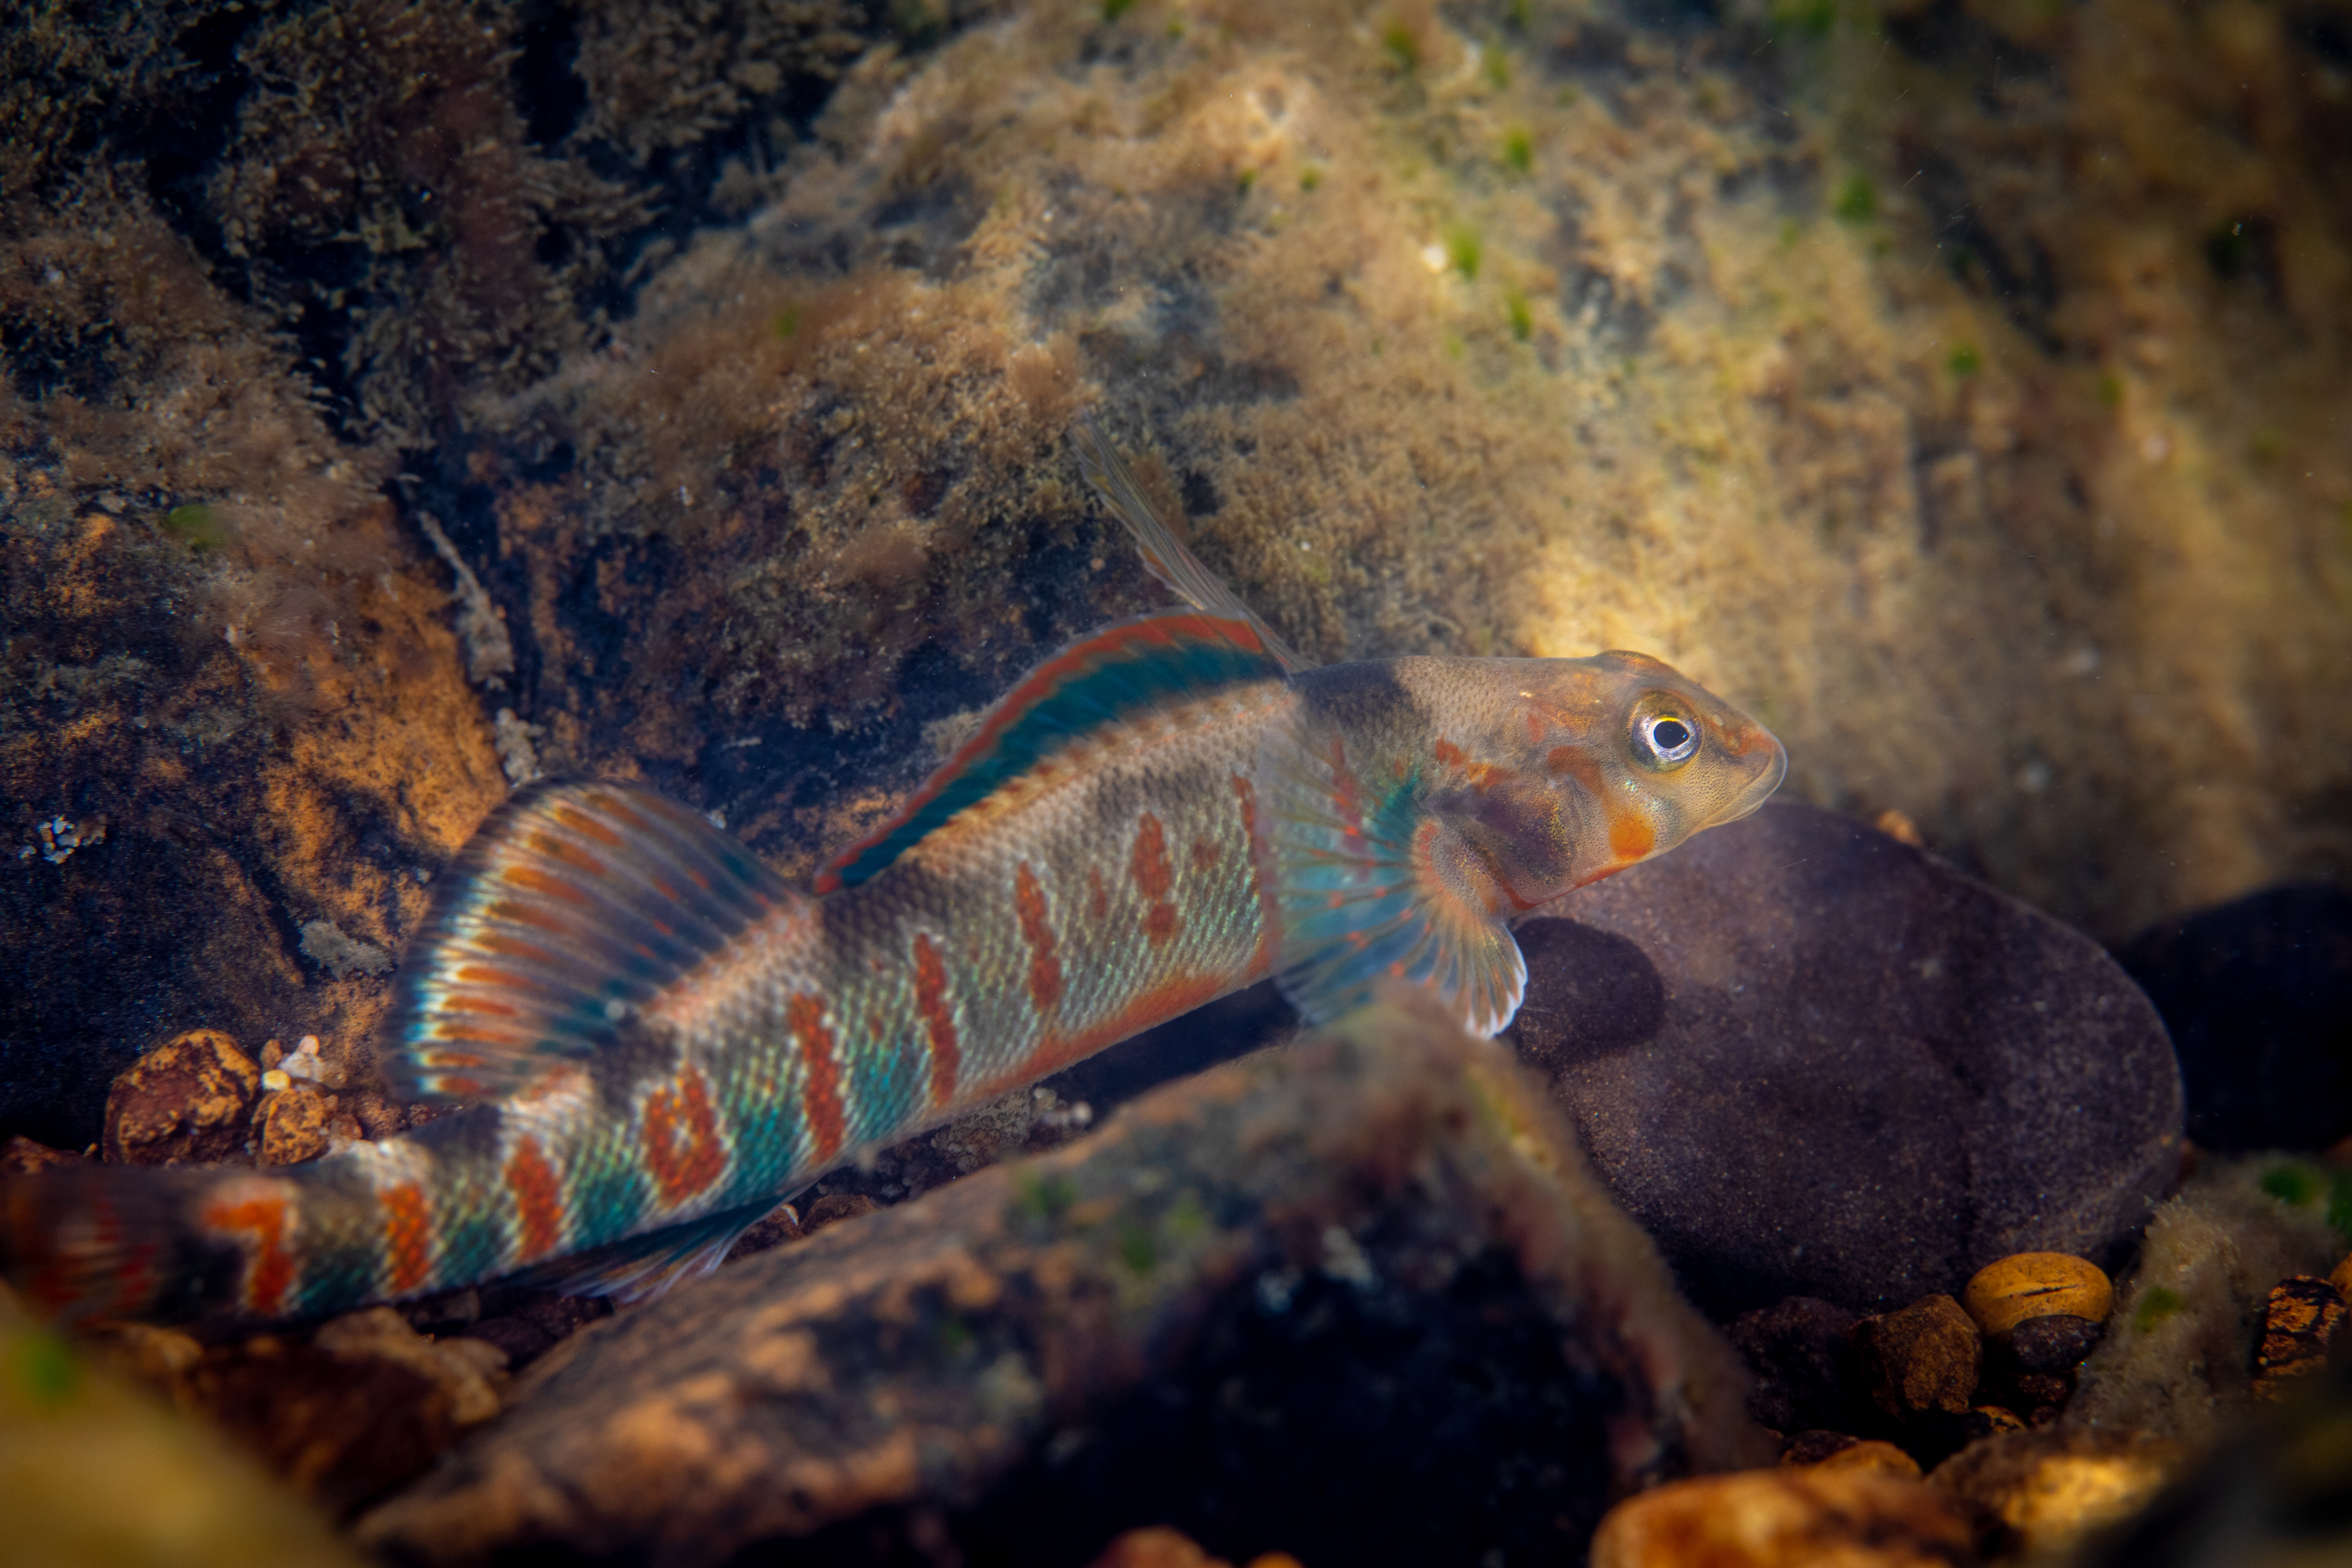 A colorful fish sits at the bottom of a rocky stream